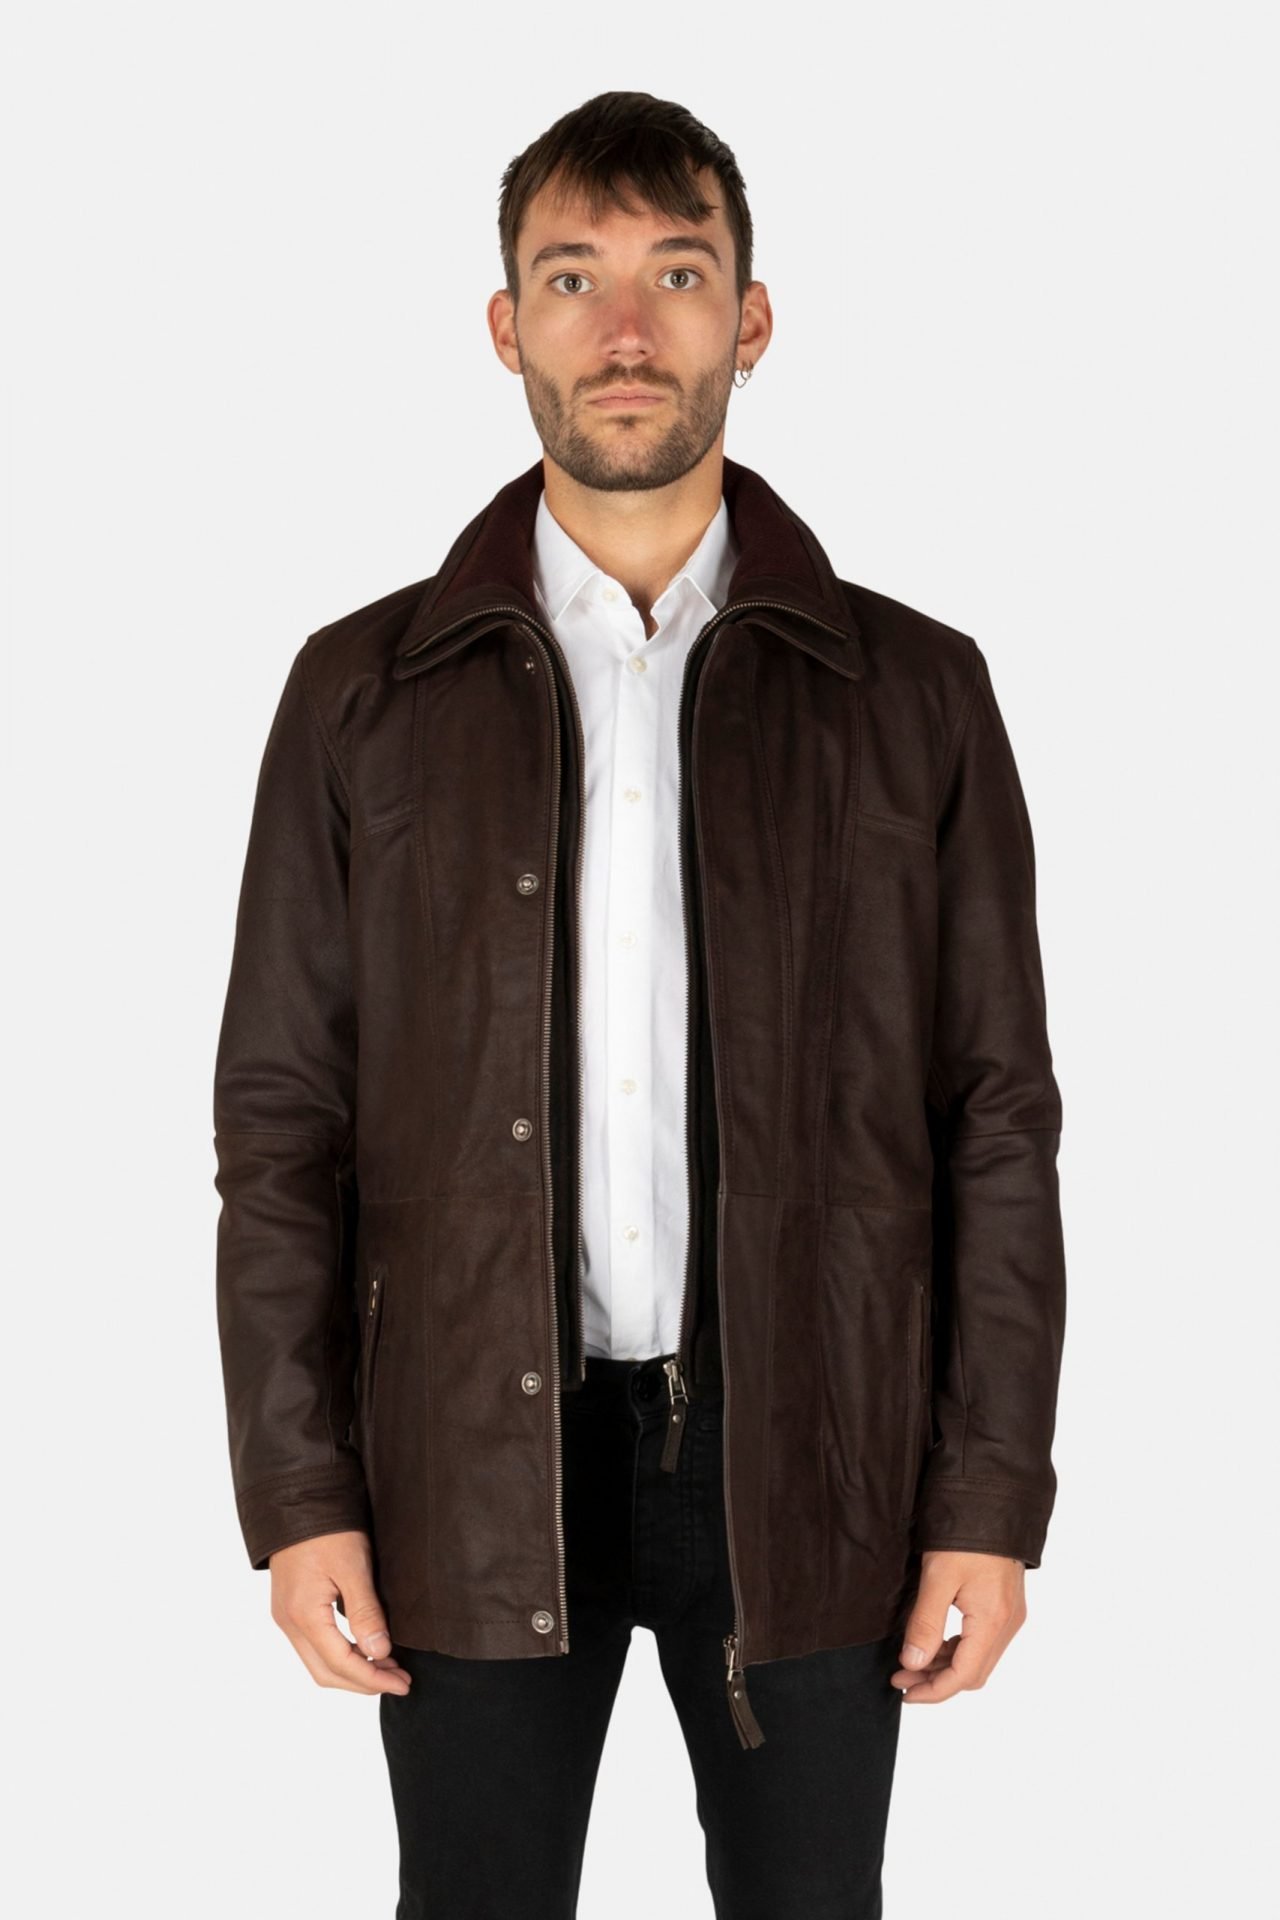 BUFF Brown Leather Parka Exquisite Brown Color